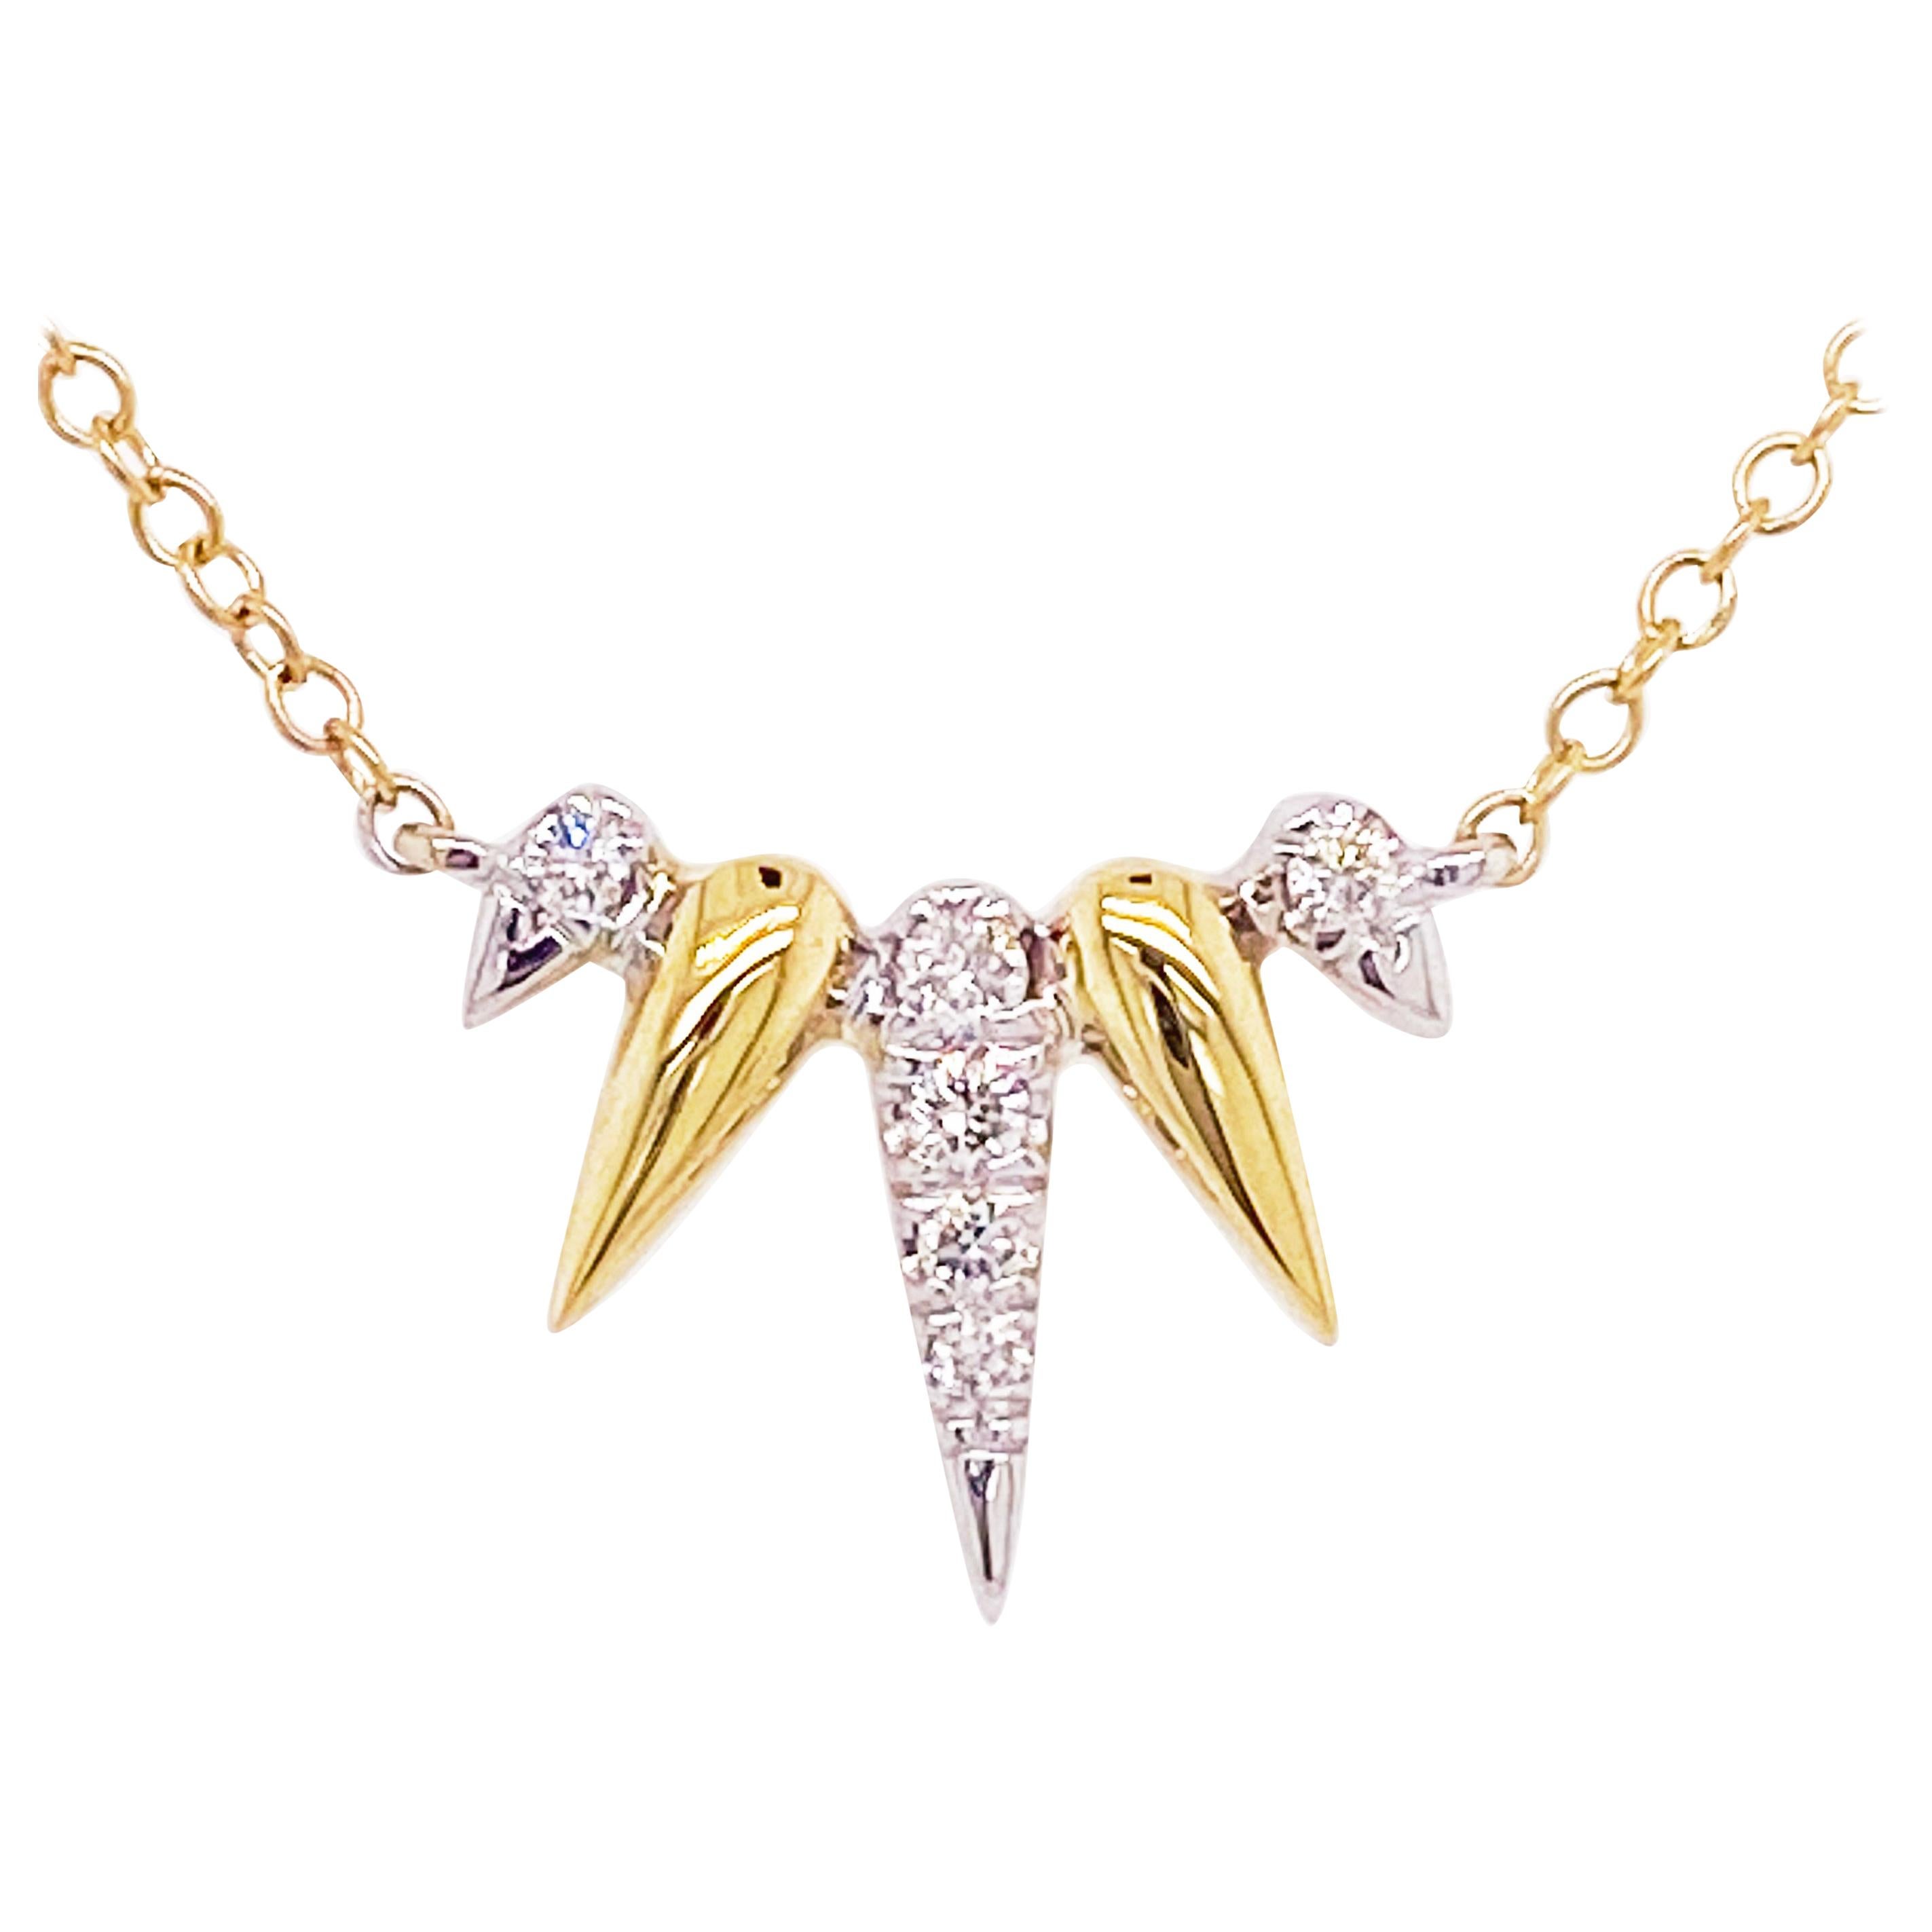 Diamond Spike Necklace, 14K Yellow-White Gold Diamond Pave Spike Fan Necklace For Sale